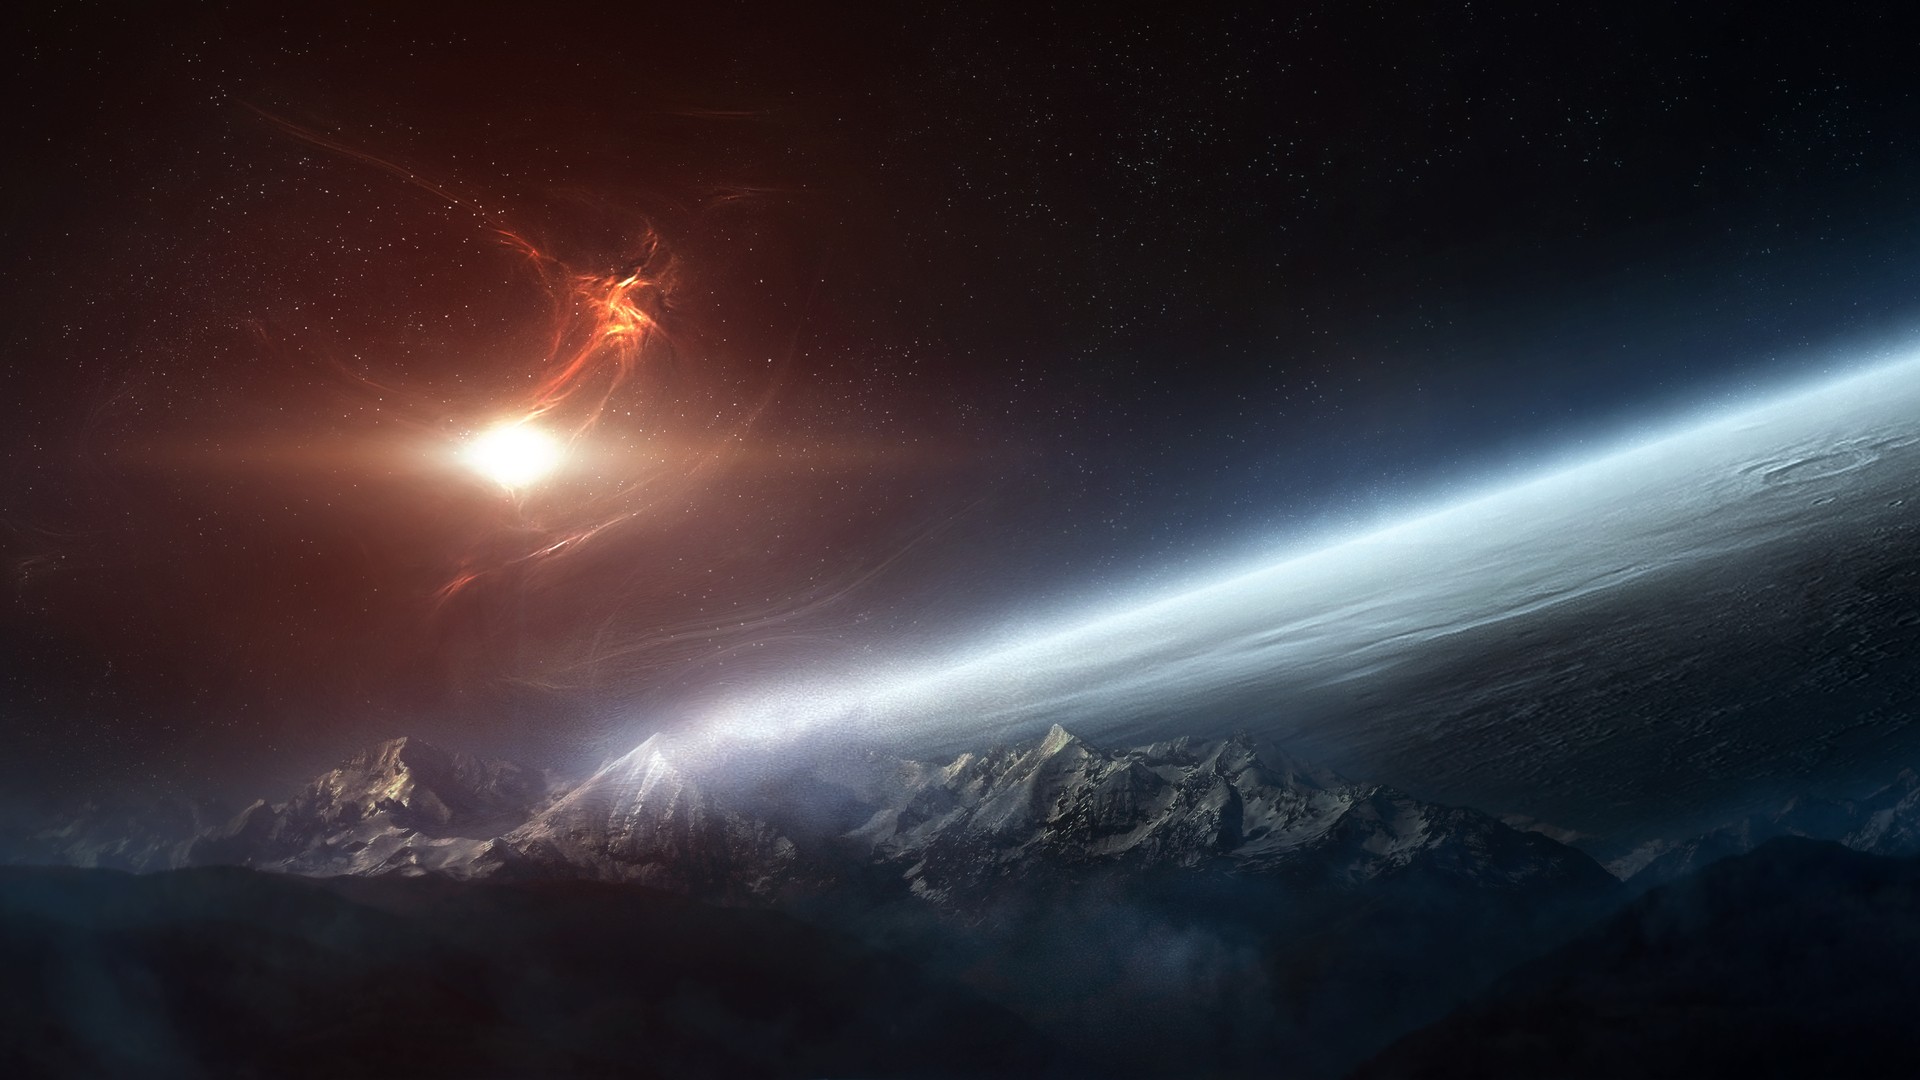 Mountains Outer Space HD Wallpaper FullHDwpp Full